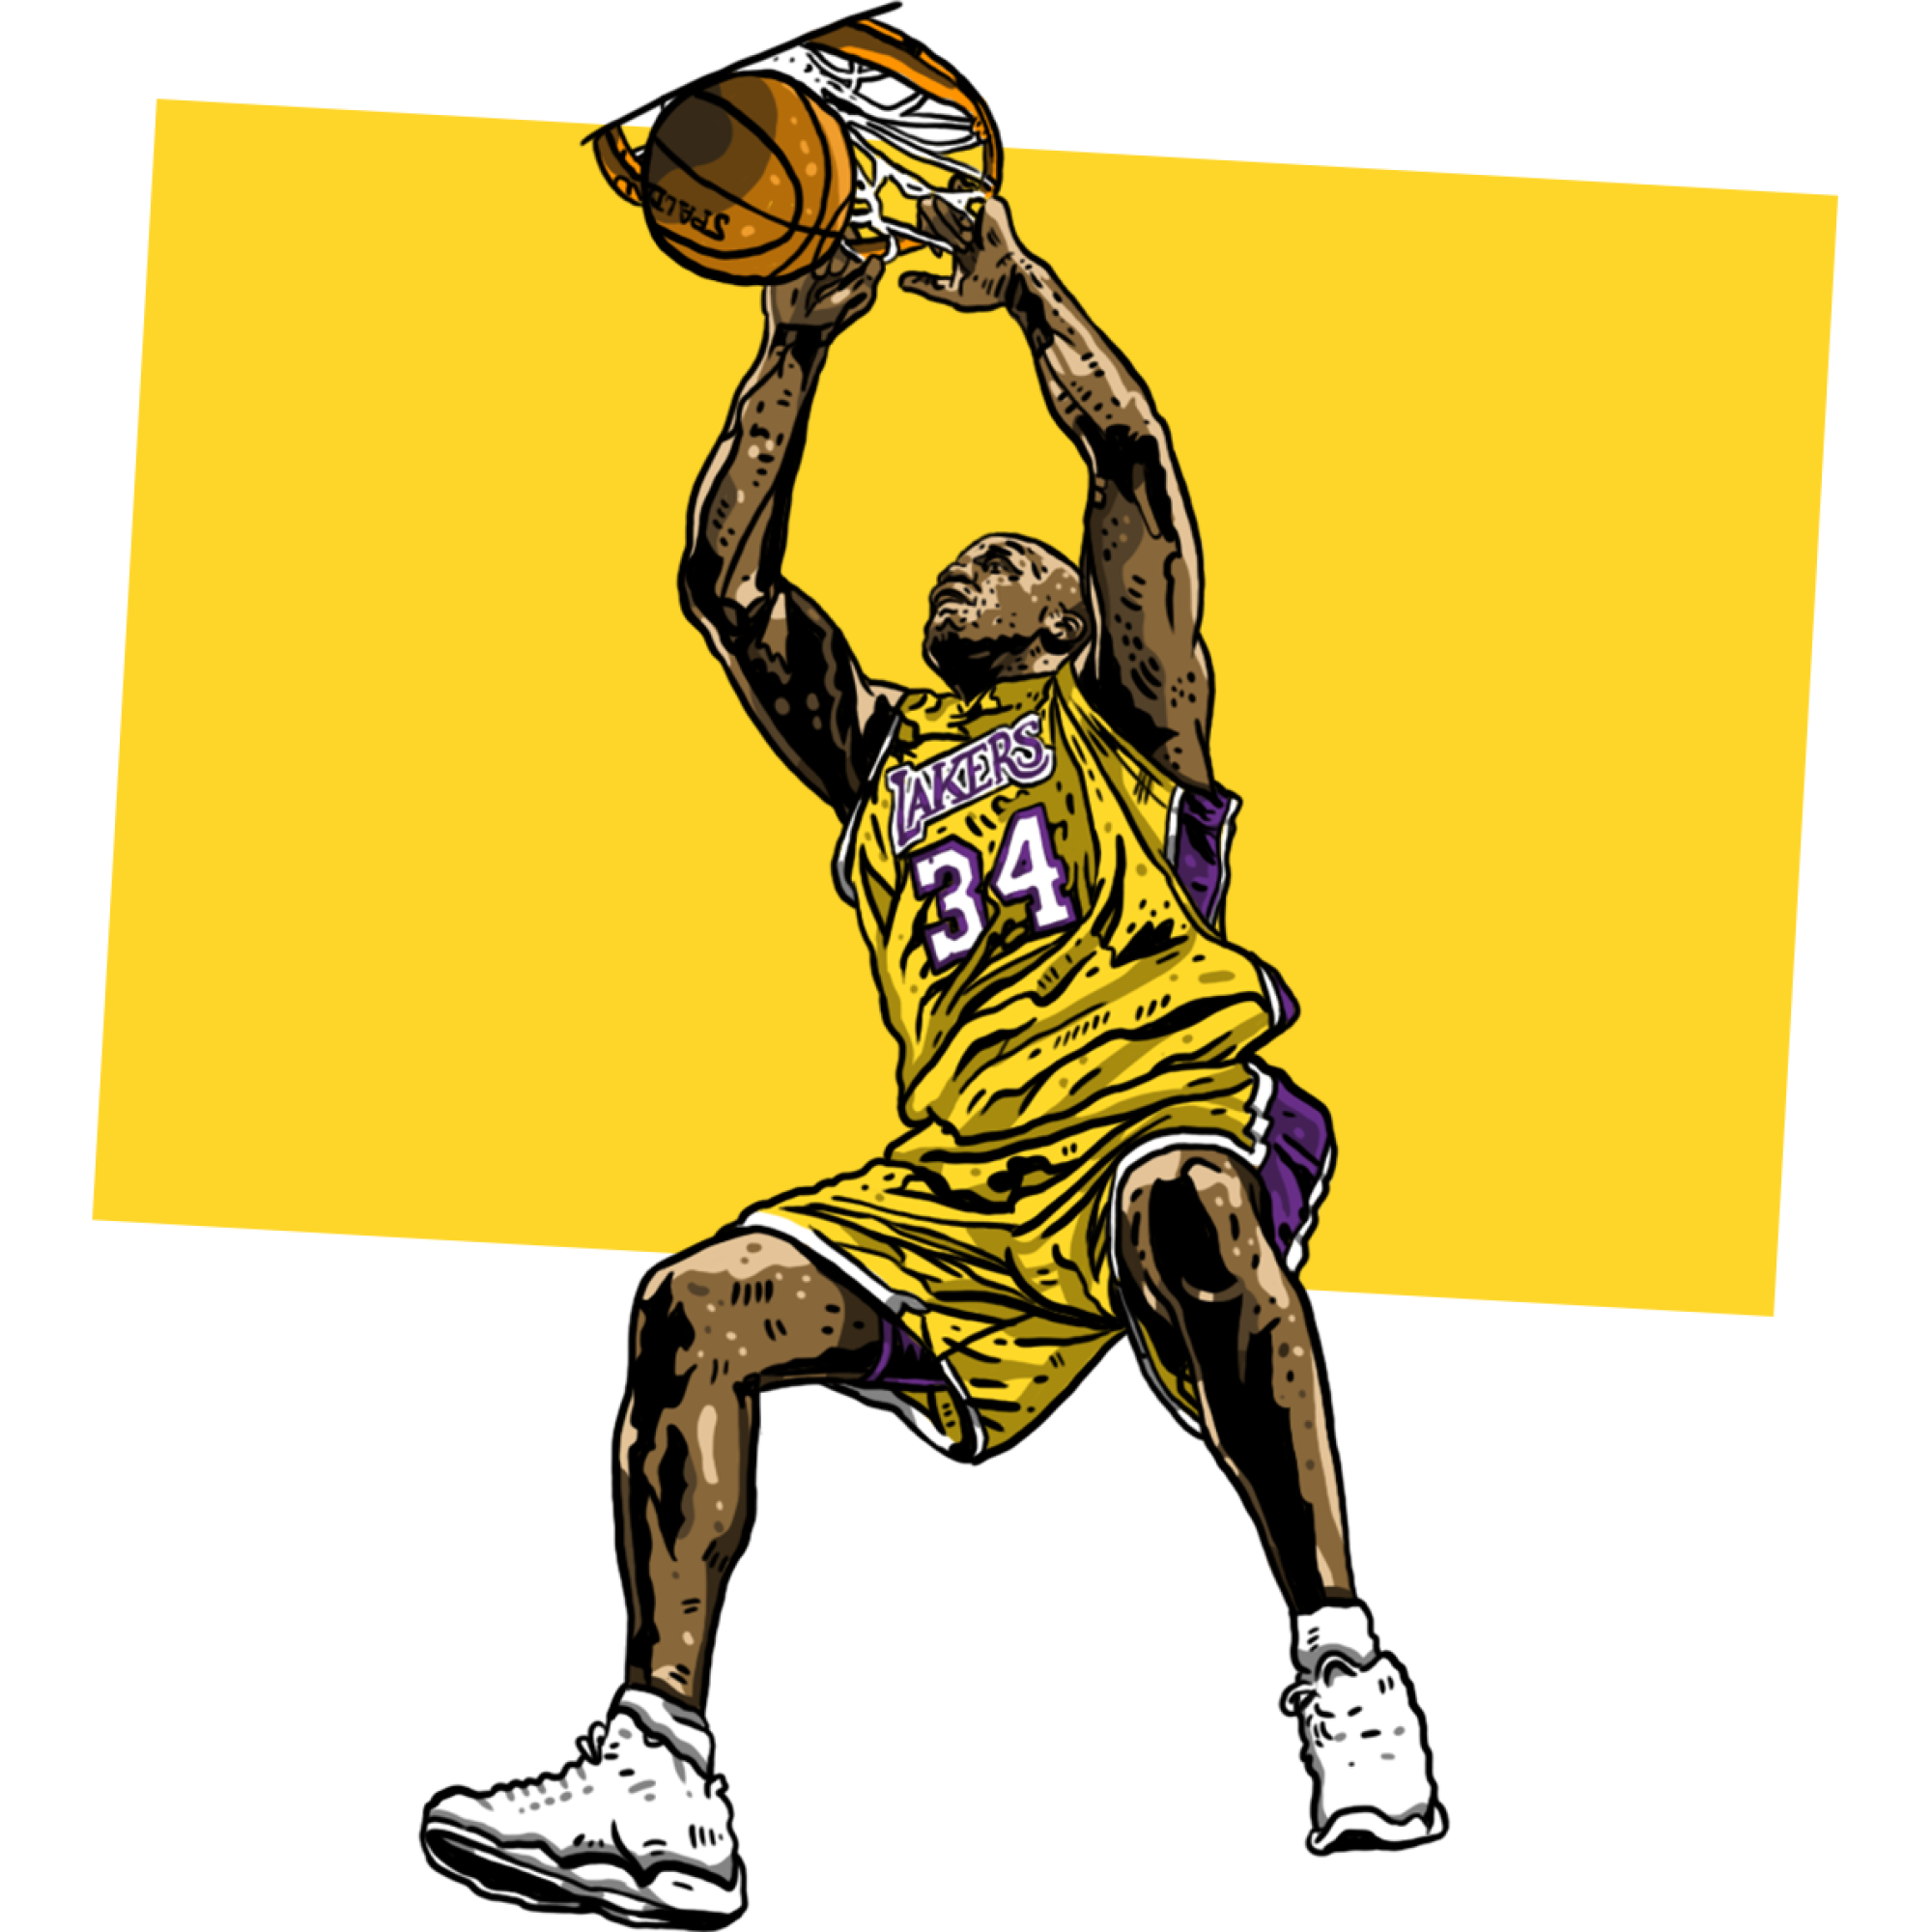 Illustration of Shaquille O'Neal in a yellow #34 jersey dunking.